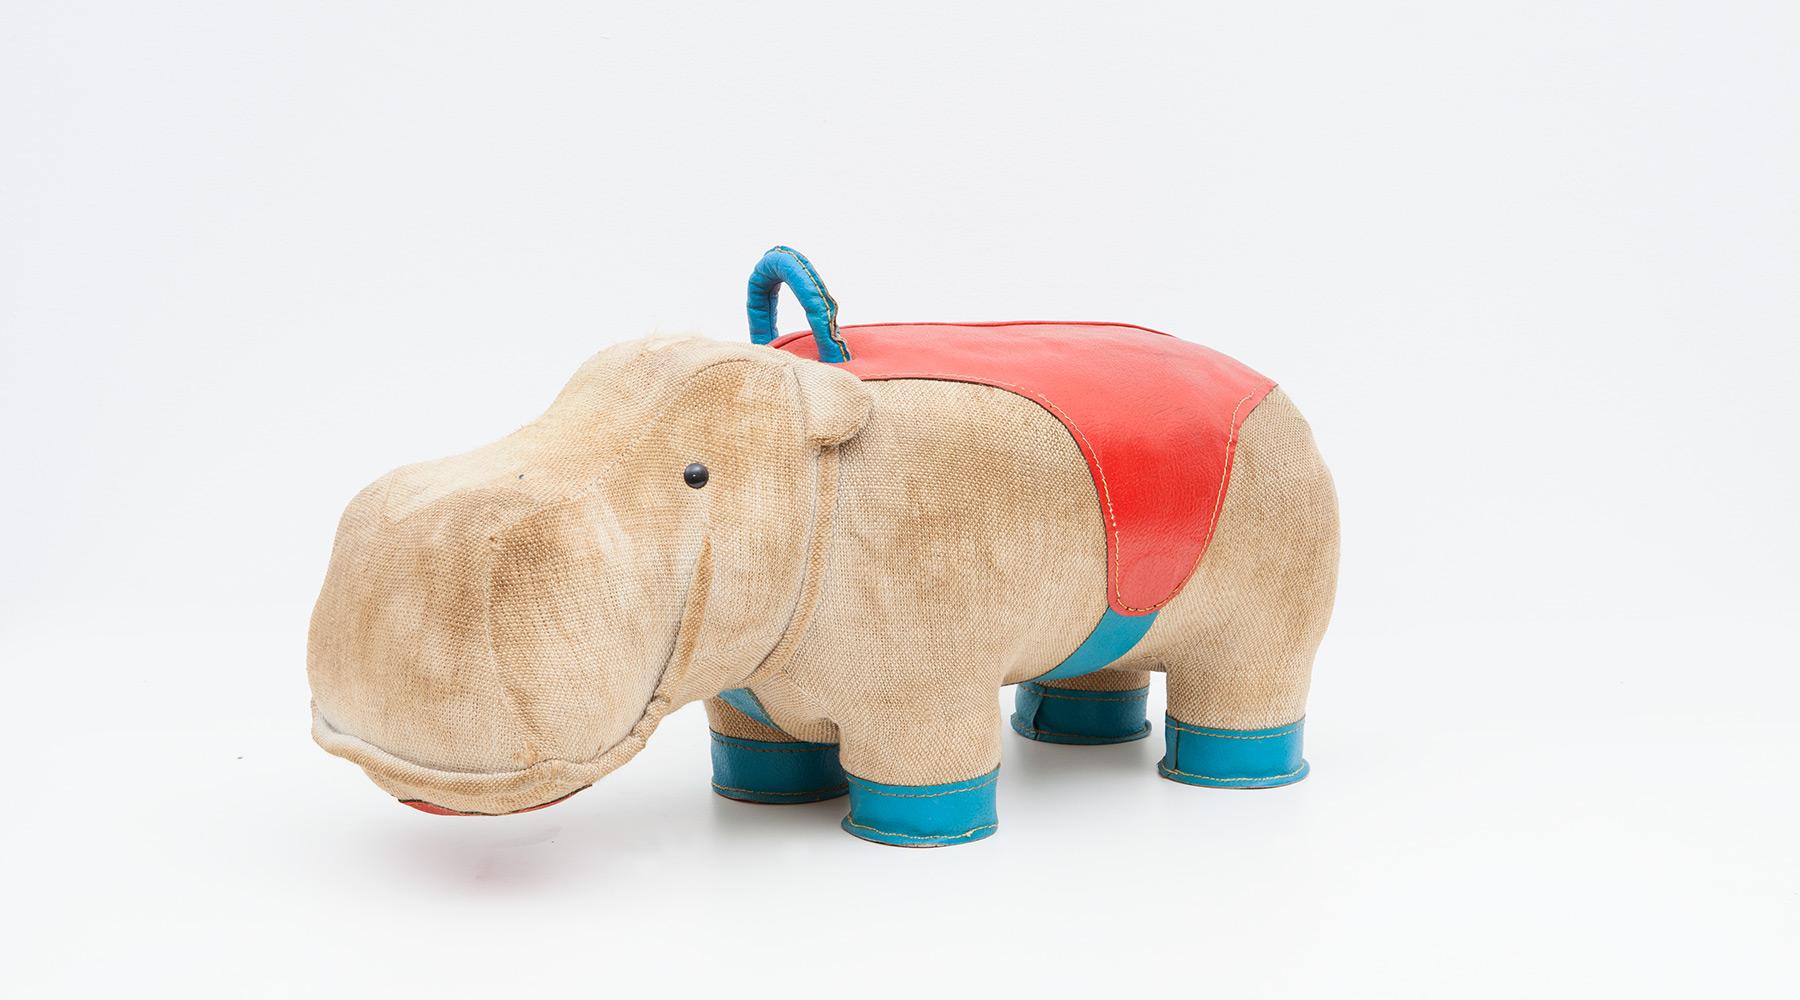 Hippo, children toy in jute and leather by Renate Müller, Germany, 1970.

Authentic animal toy from the 1970s by Renate Müller. Unique in shape and workmanship. This example shows a hippo made of jute and leather details in red and blue. High